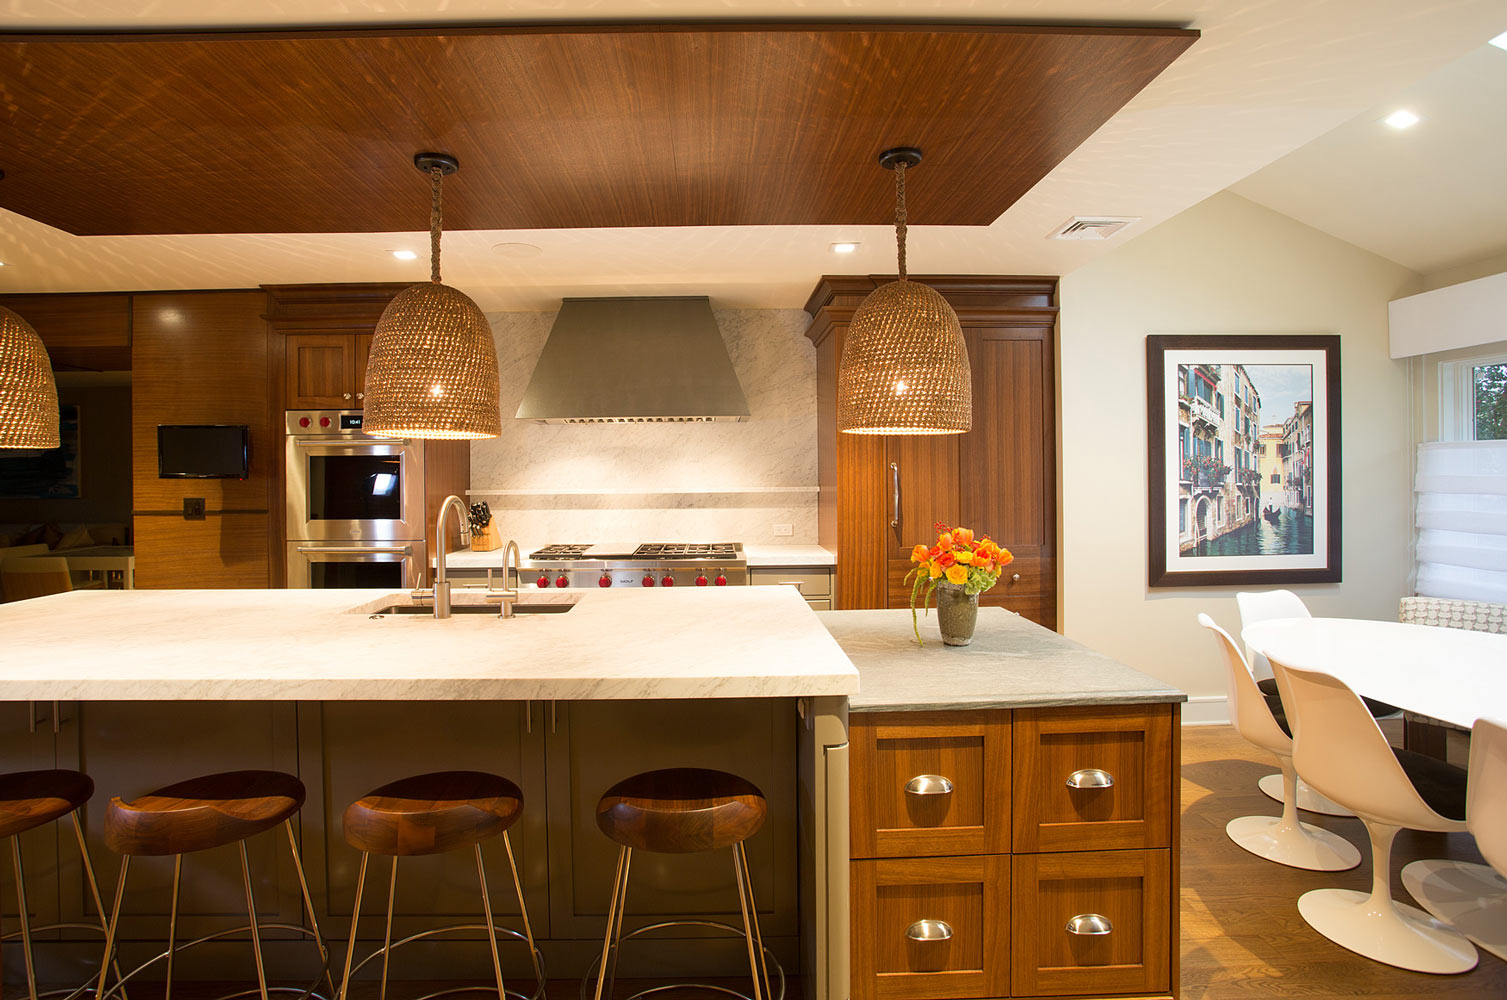 Kitchen interiors designed by Annette Jaffe Interiors in Roslyn